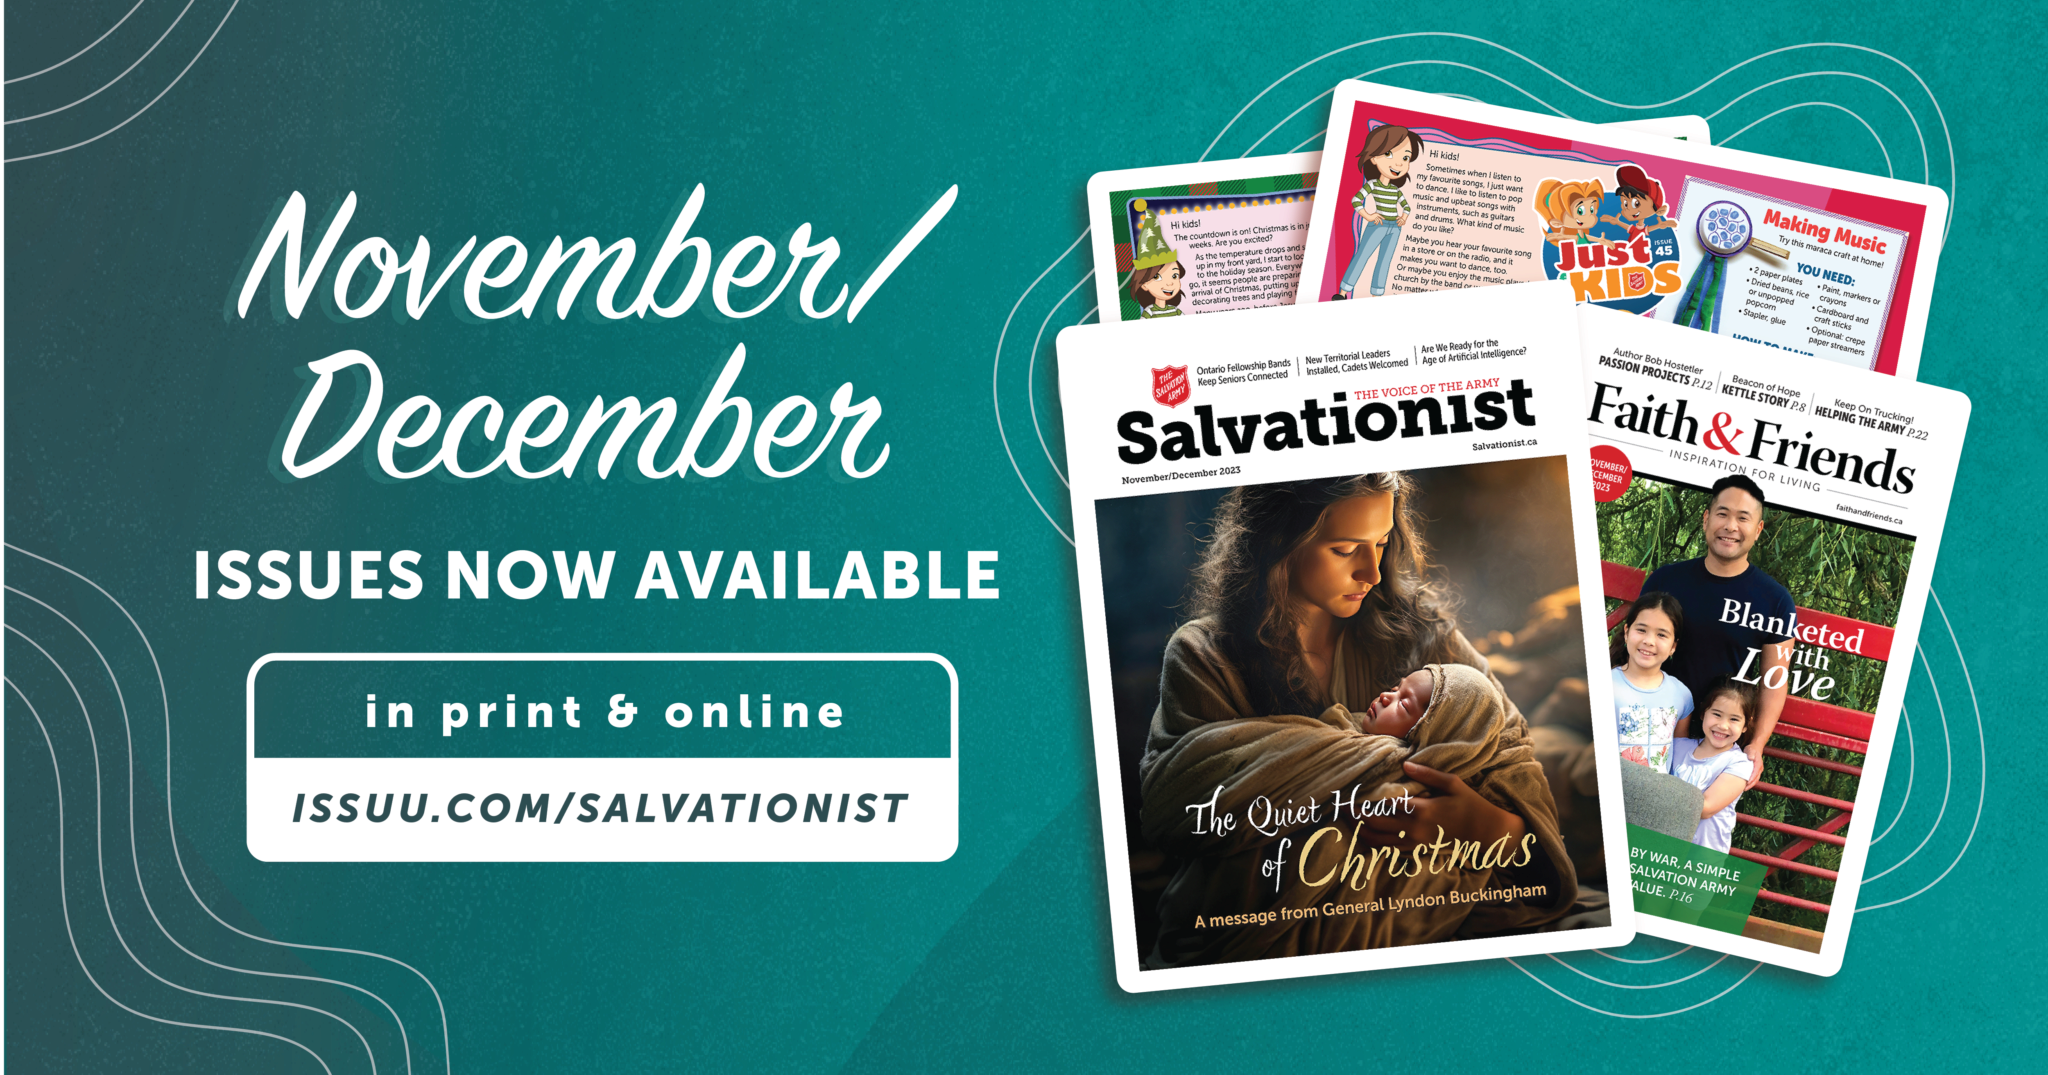 September and October issues now available in print and online. Issuu.com/salvarionist